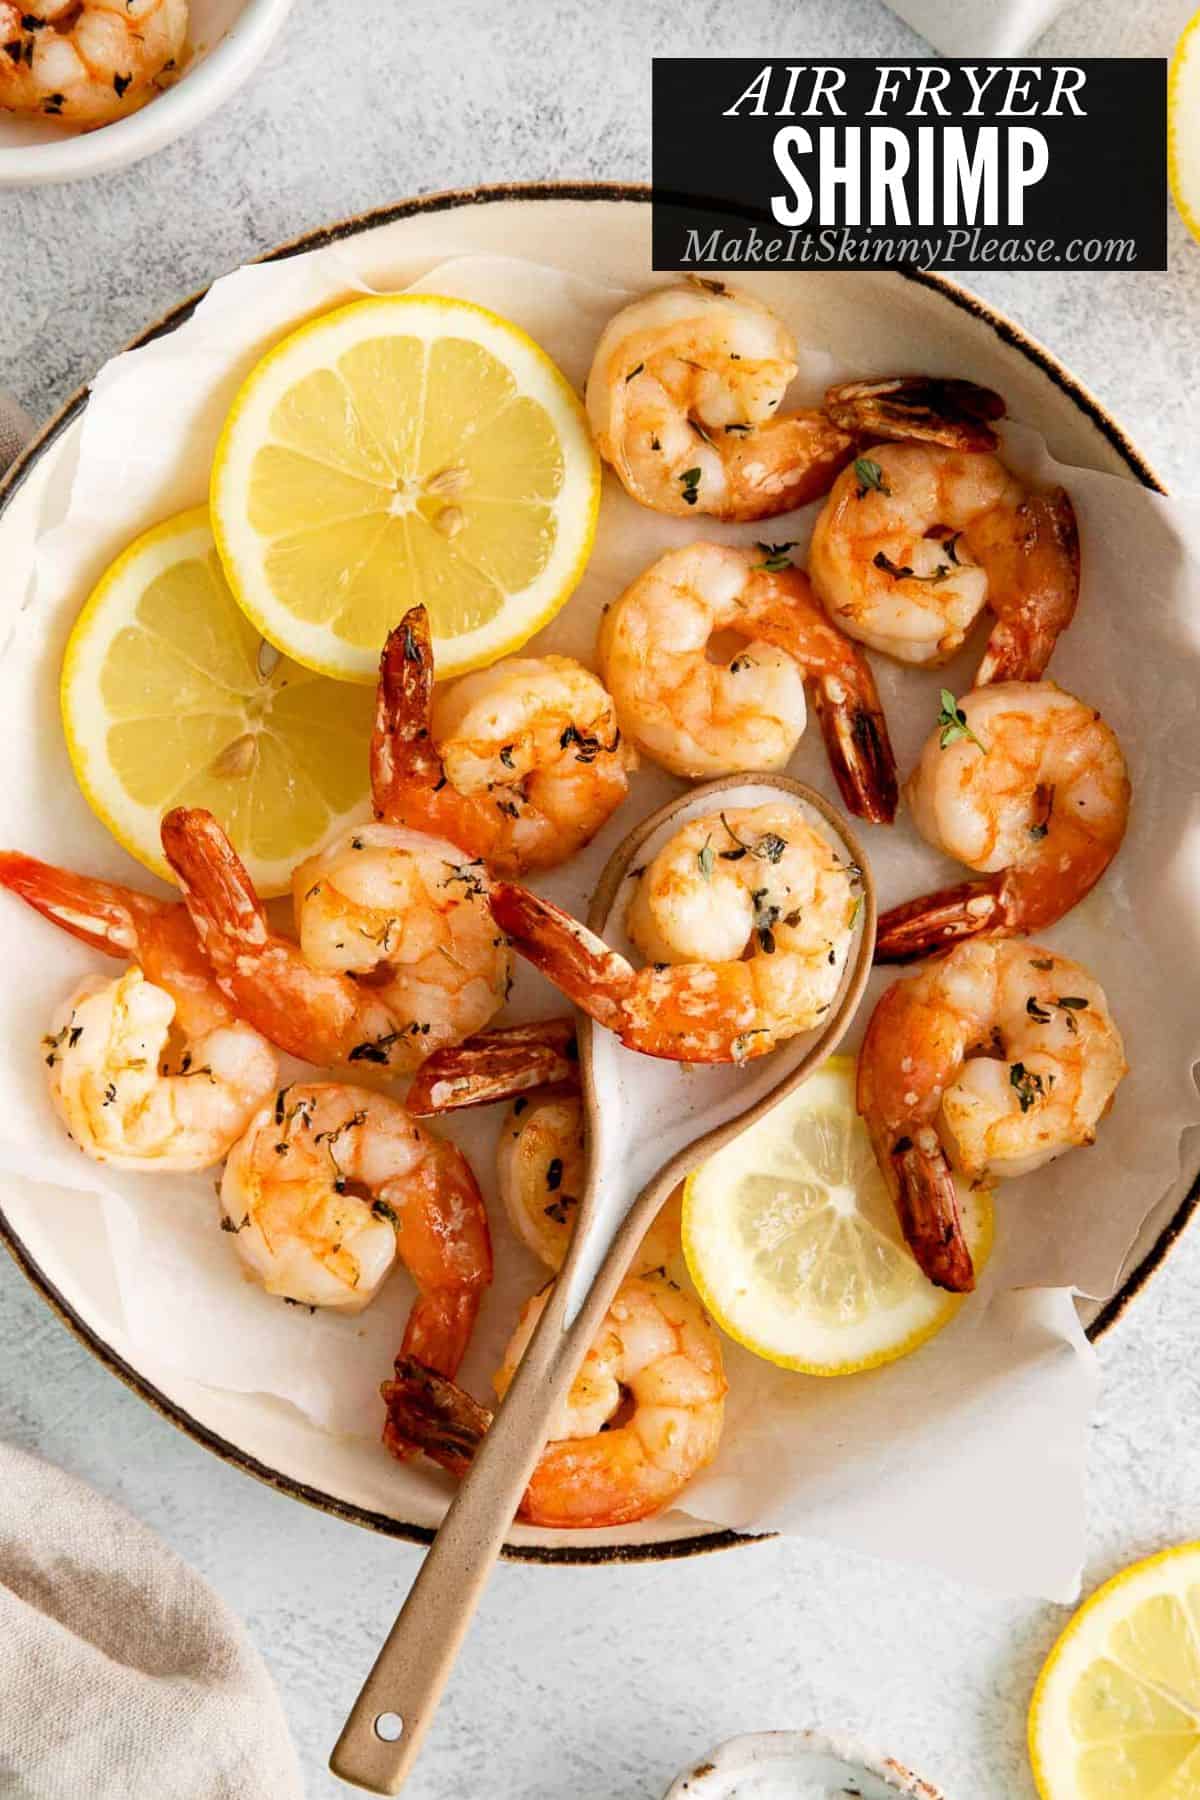 air fryer shrimp in bowl with lemon slices and spoon.